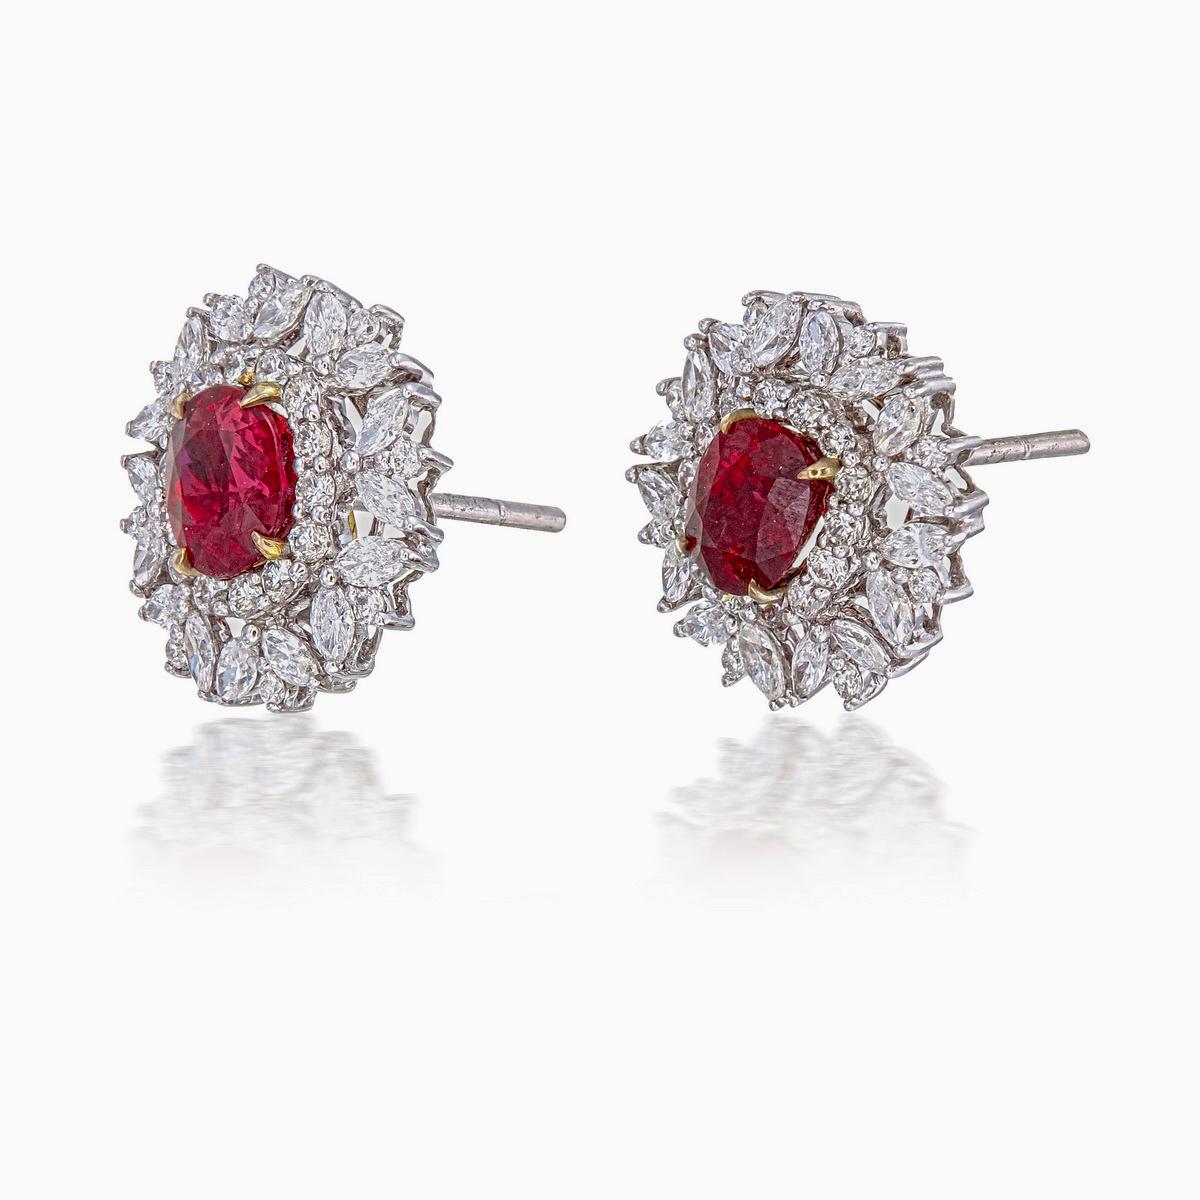 A brand new handcrafted ruby earring by Rewa Jewels. The earring’s center stones weigh 1.23ct and 1.32ct, are of Burmese origin and certified by Gem Research Swisslab (GRS) as natural, unheated, 'Pigeon blood' with certificate numbers 2021-094559